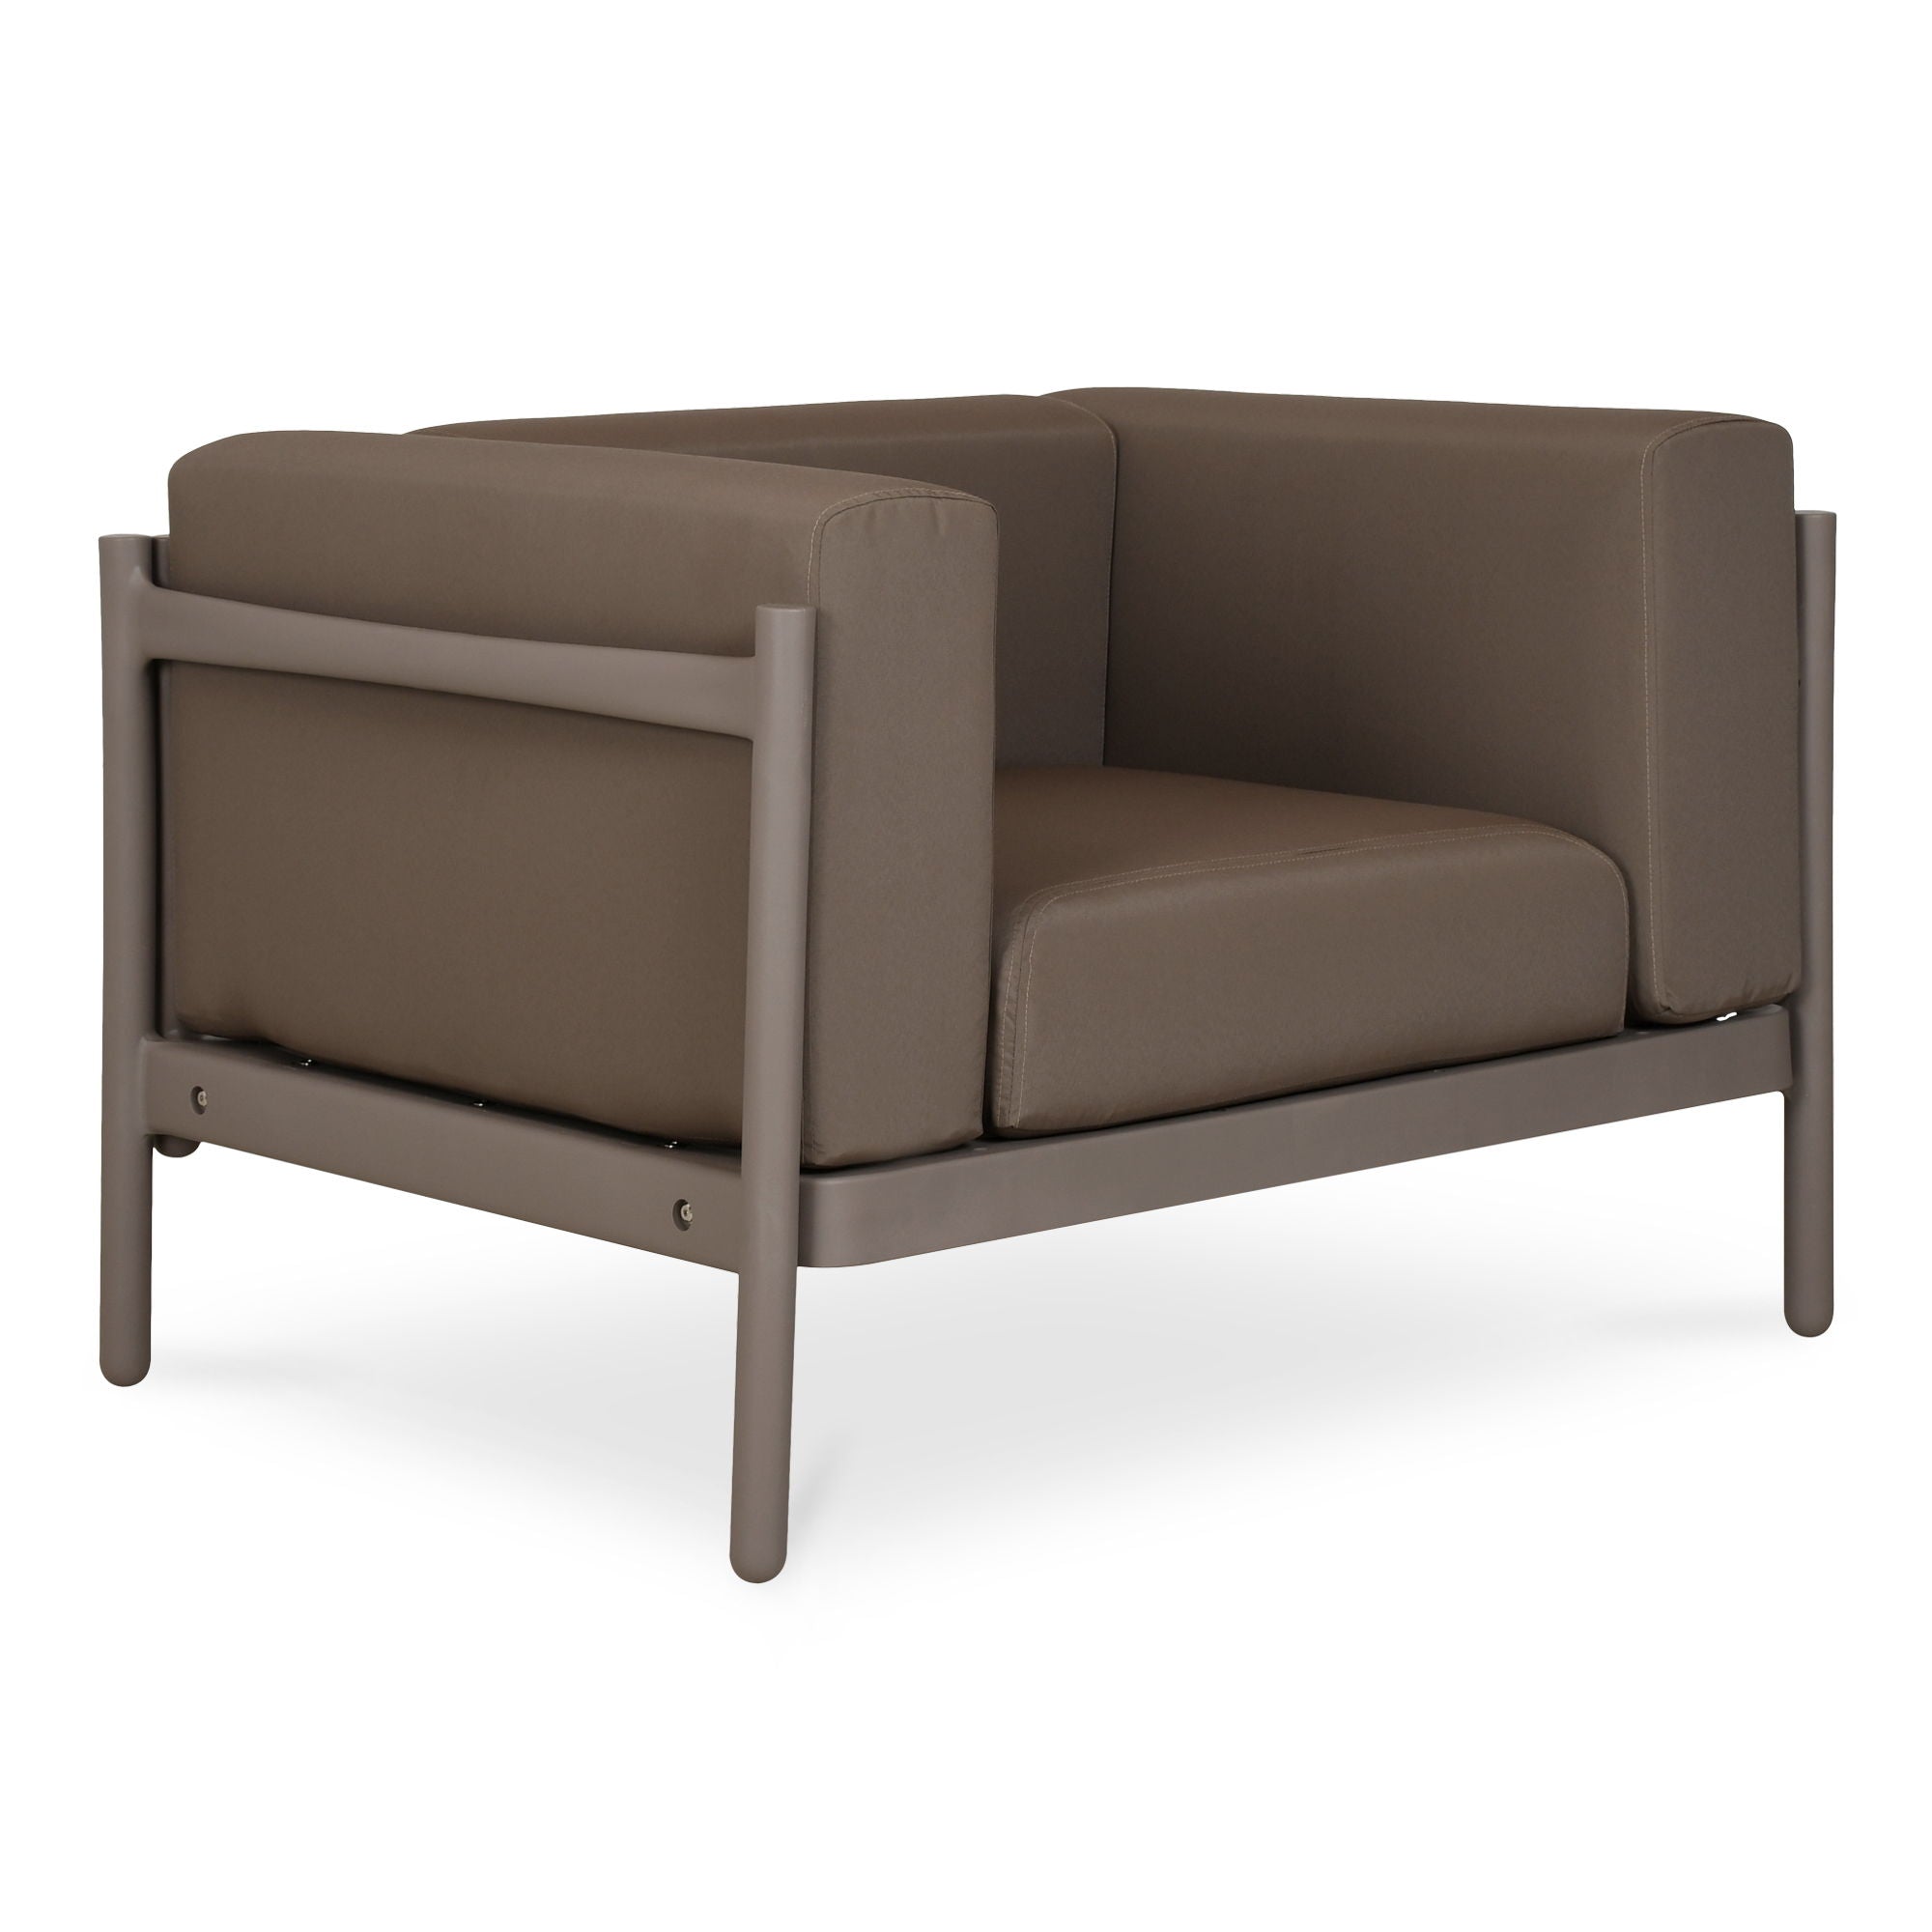 Suri - Outdoor Lounge Chair - Taupe